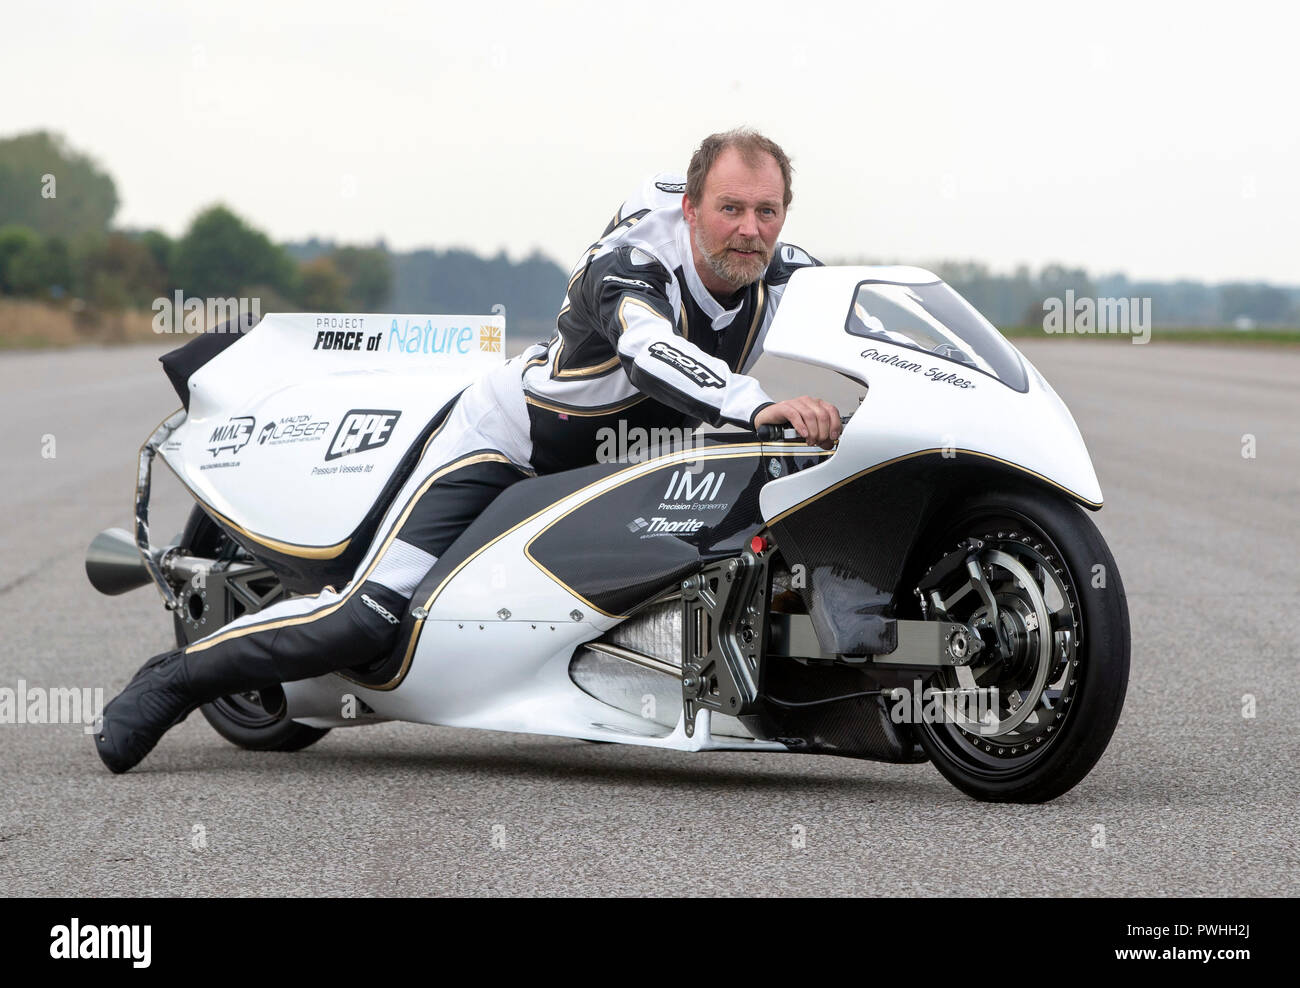 Graham Sykes on his 'Force of Nature' steam rocket bike ahead of tow testing his bike in preparation for his world land speed record attempt for a steam powered vehicle, during the Straightliners top speed &amp; wheelie event at Elvington Airfield in Yorkshire. Stock Photo